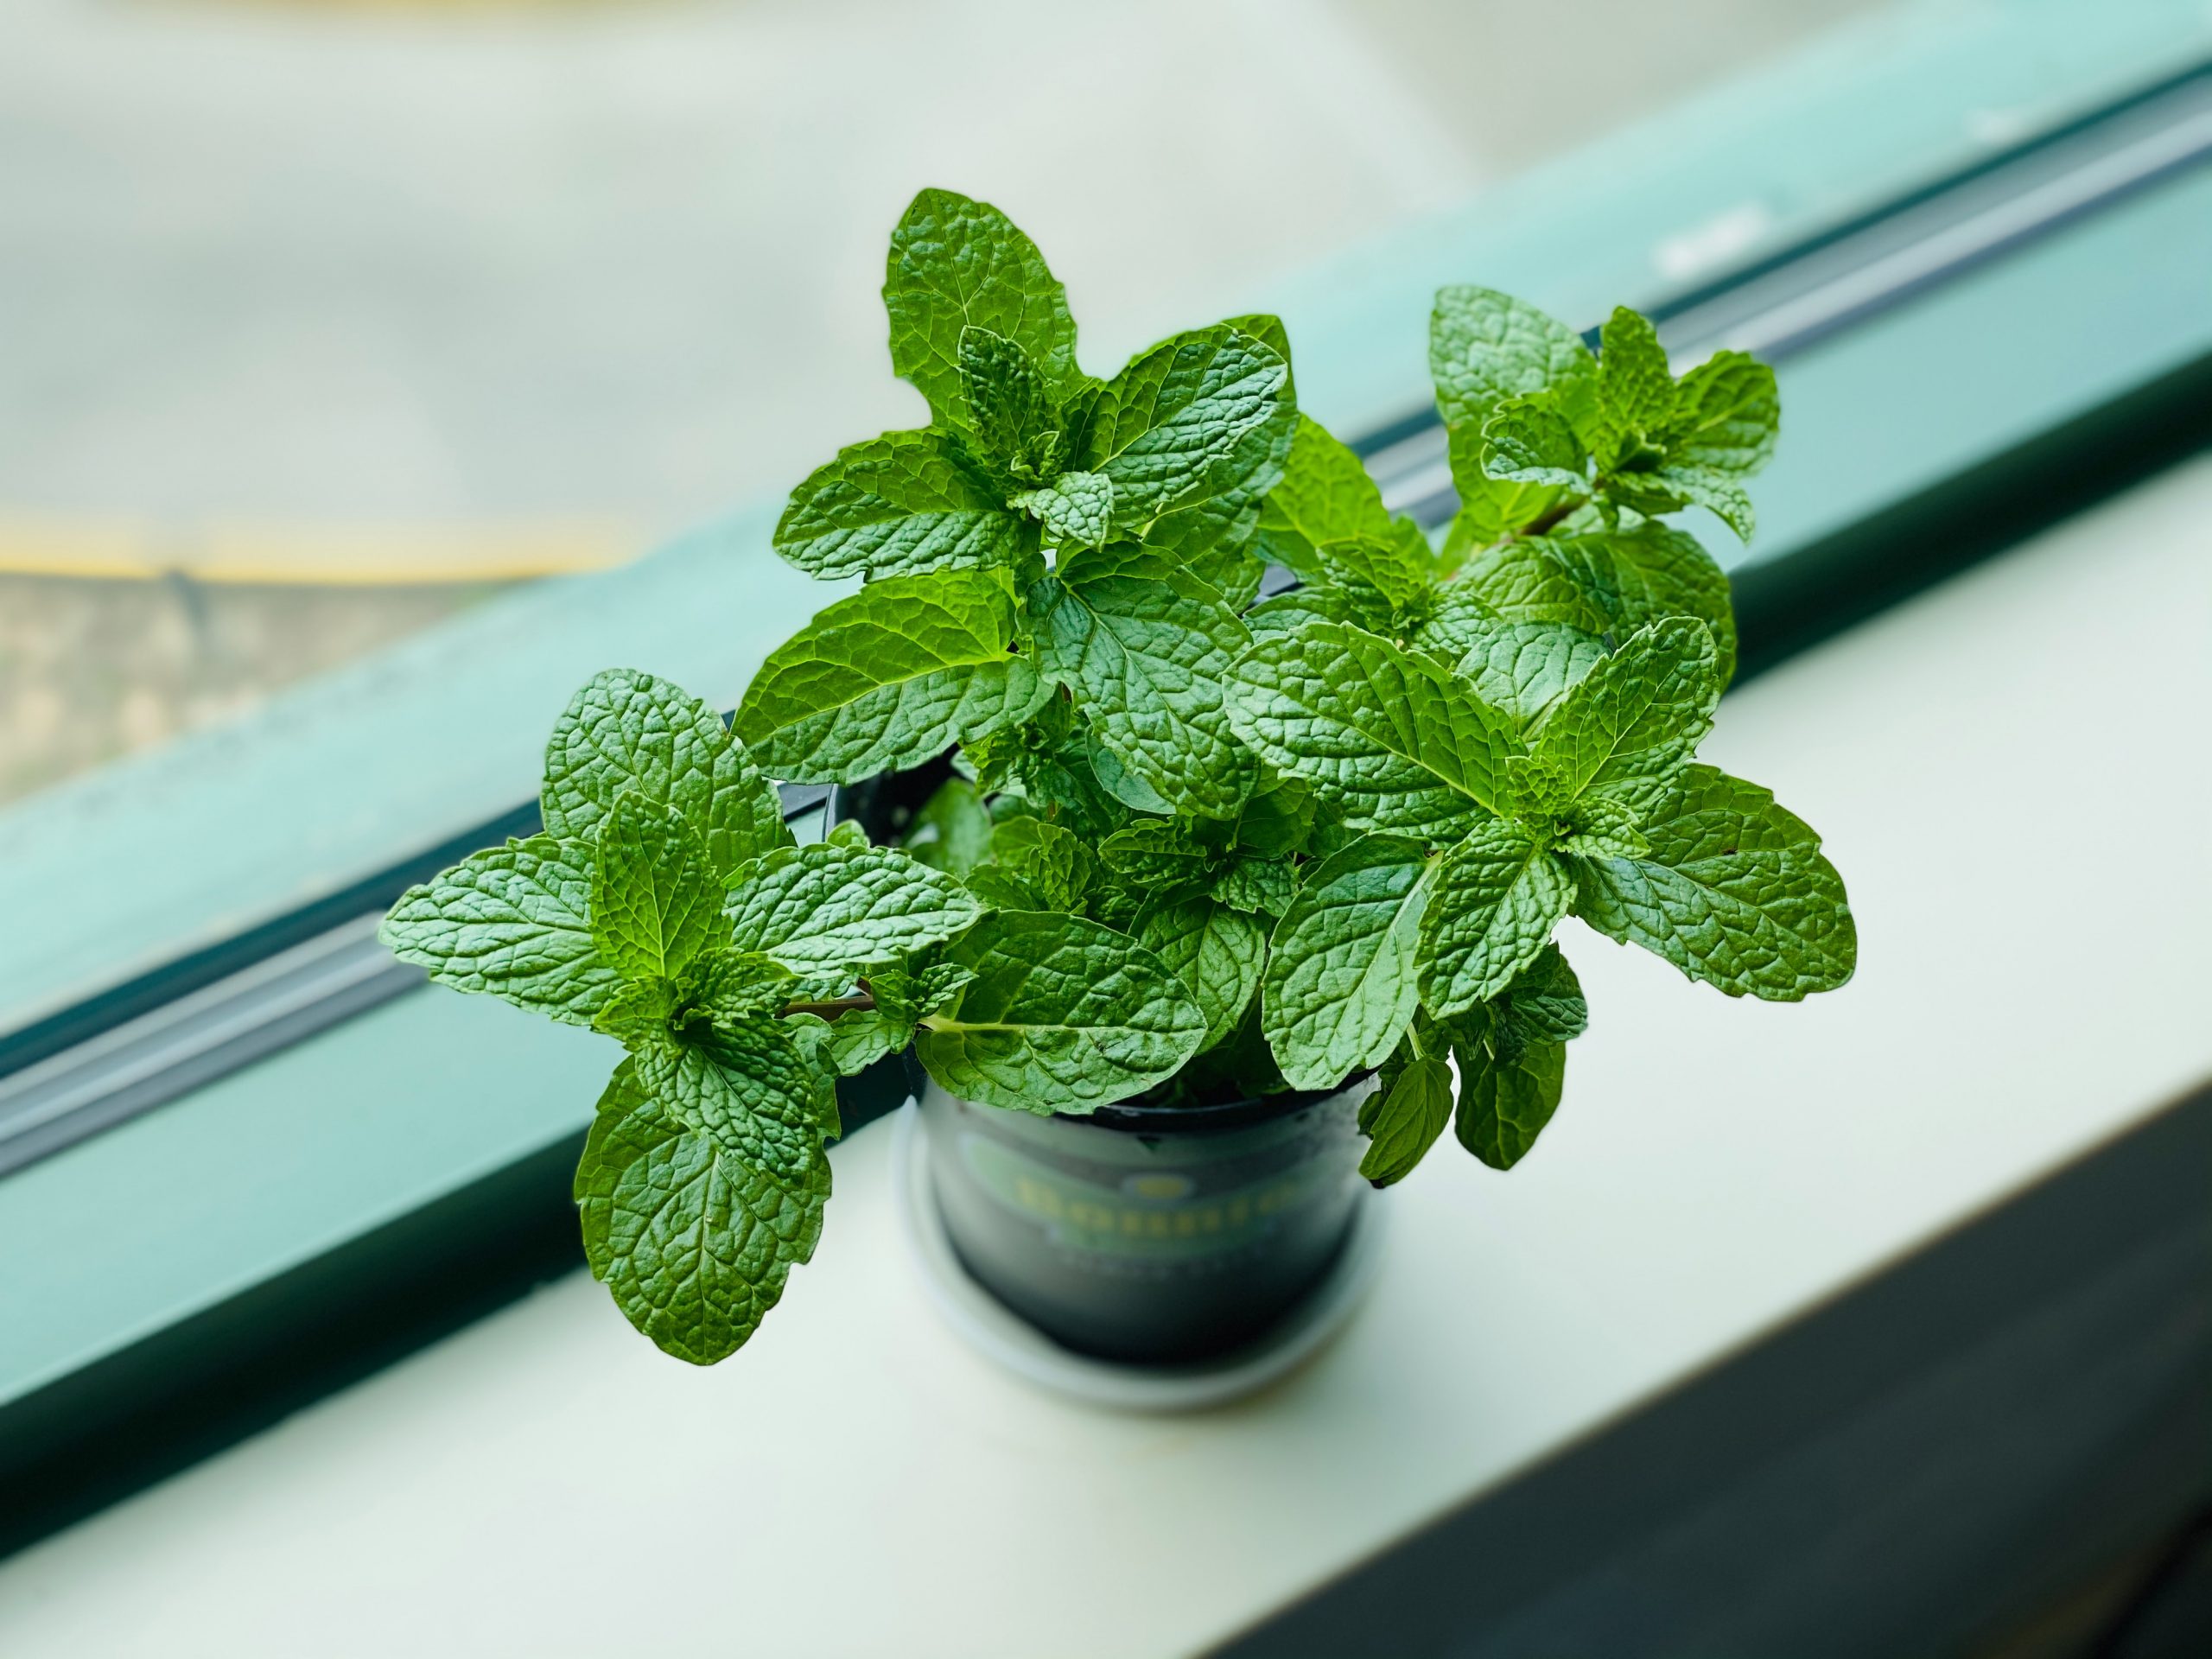 Can You Grow Mint From Grocery Store Cuttings?